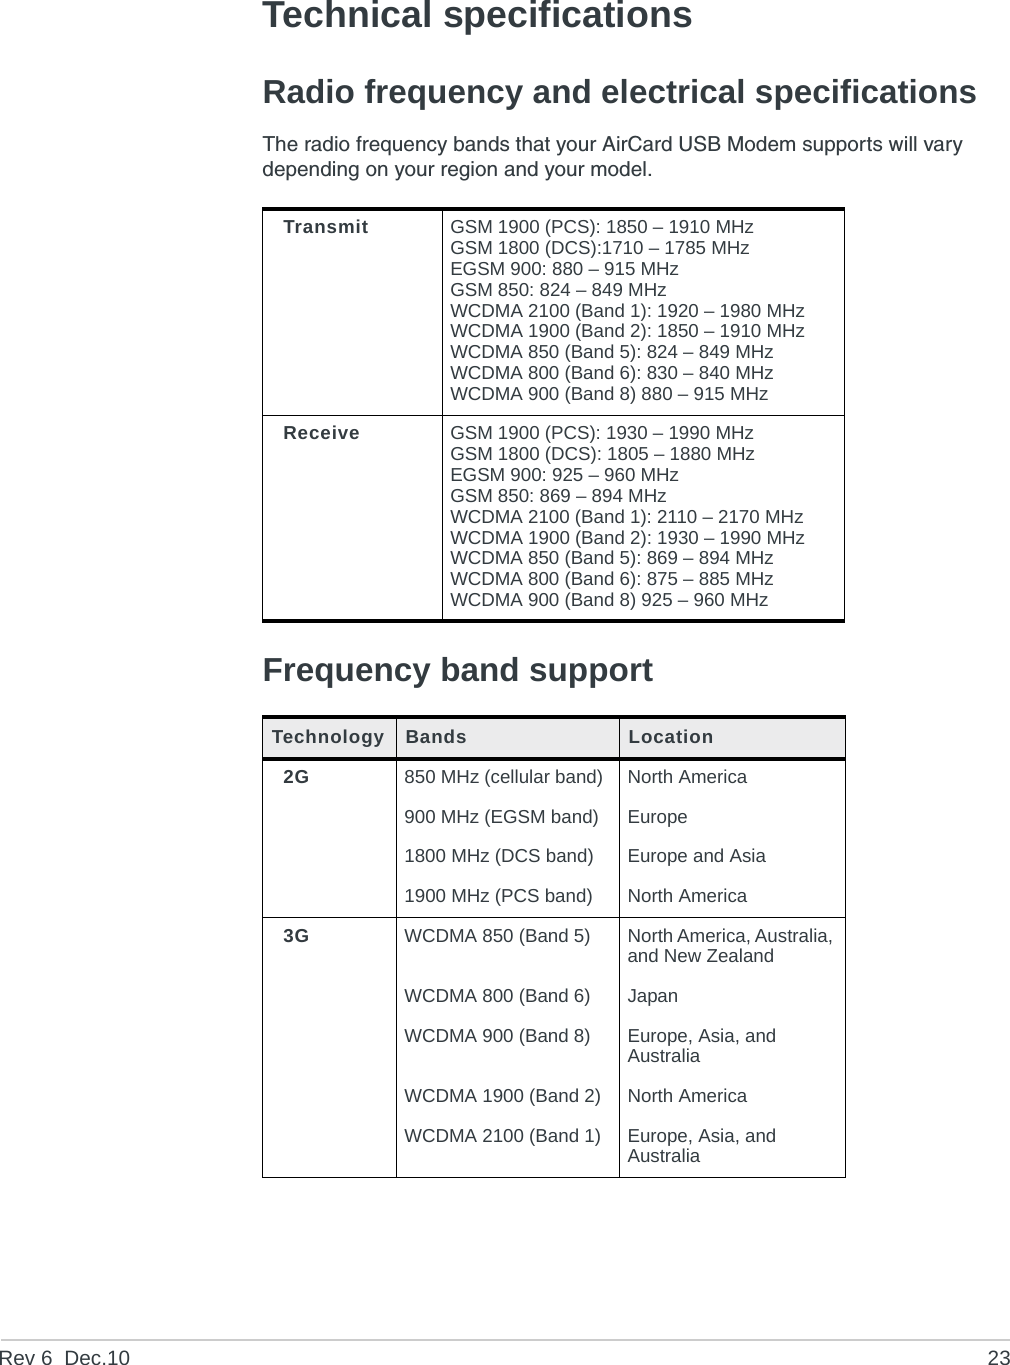 Rev 6  Dec.10 23Technical specificationsRadio frequency and electrical specificationsThe radio frequency bands that your AirCard USB Modem supports will vary depending on your region and your model.Frequency band supportTransmit GSM 1900 (PCS): 1850 – 1910 MHzGSM 1800 (DCS):1710 – 1785 MHzEGSM 900: 880 – 915 MHzGSM 850: 824 – 849 MHzWCDMA 2100 (Band 1): 1920 – 1980 MHzWCDMA 1900 (Band 2): 1850 – 1910 MHzWCDMA 850 (Band 5): 824 – 849 MHzWCDMA 800 (Band 6): 830 – 840 MHzWCDMA 900 (Band 8) 880 – 915 MHzReceive GSM 1900 (PCS): 1930 – 1990 MHzGSM 1800 (DCS): 1805 – 1880 MHzEGSM 900: 925 – 960 MHzGSM 850: 869 – 894 MHzWCDMA 2100 (Band 1): 2110 – 2170 MHzWCDMA 1900 (Band 2): 1930 – 1990 MHzWCDMA 850 (Band 5): 869 – 894 MHzWCDMA 800 (Band 6): 875 – 885 MHzWCDMA 900 (Band 8) 925 – 960 MHzTechnology Bands Location2G 850 MHz (cellular band) North America900 MHz (EGSM band) Europe1800 MHz (DCS band) Europe and Asia1900 MHz (PCS band) North America3G WCDMA 850 (Band 5) North America, Australia, and New ZealandWCDMA 800 (Band 6) JapanWCDMA 900 (Band 8) Europe, Asia, and AustraliaWCDMA 1900 (Band 2) North AmericaWCDMA 2100 (Band 1) Europe, Asia, and Australia